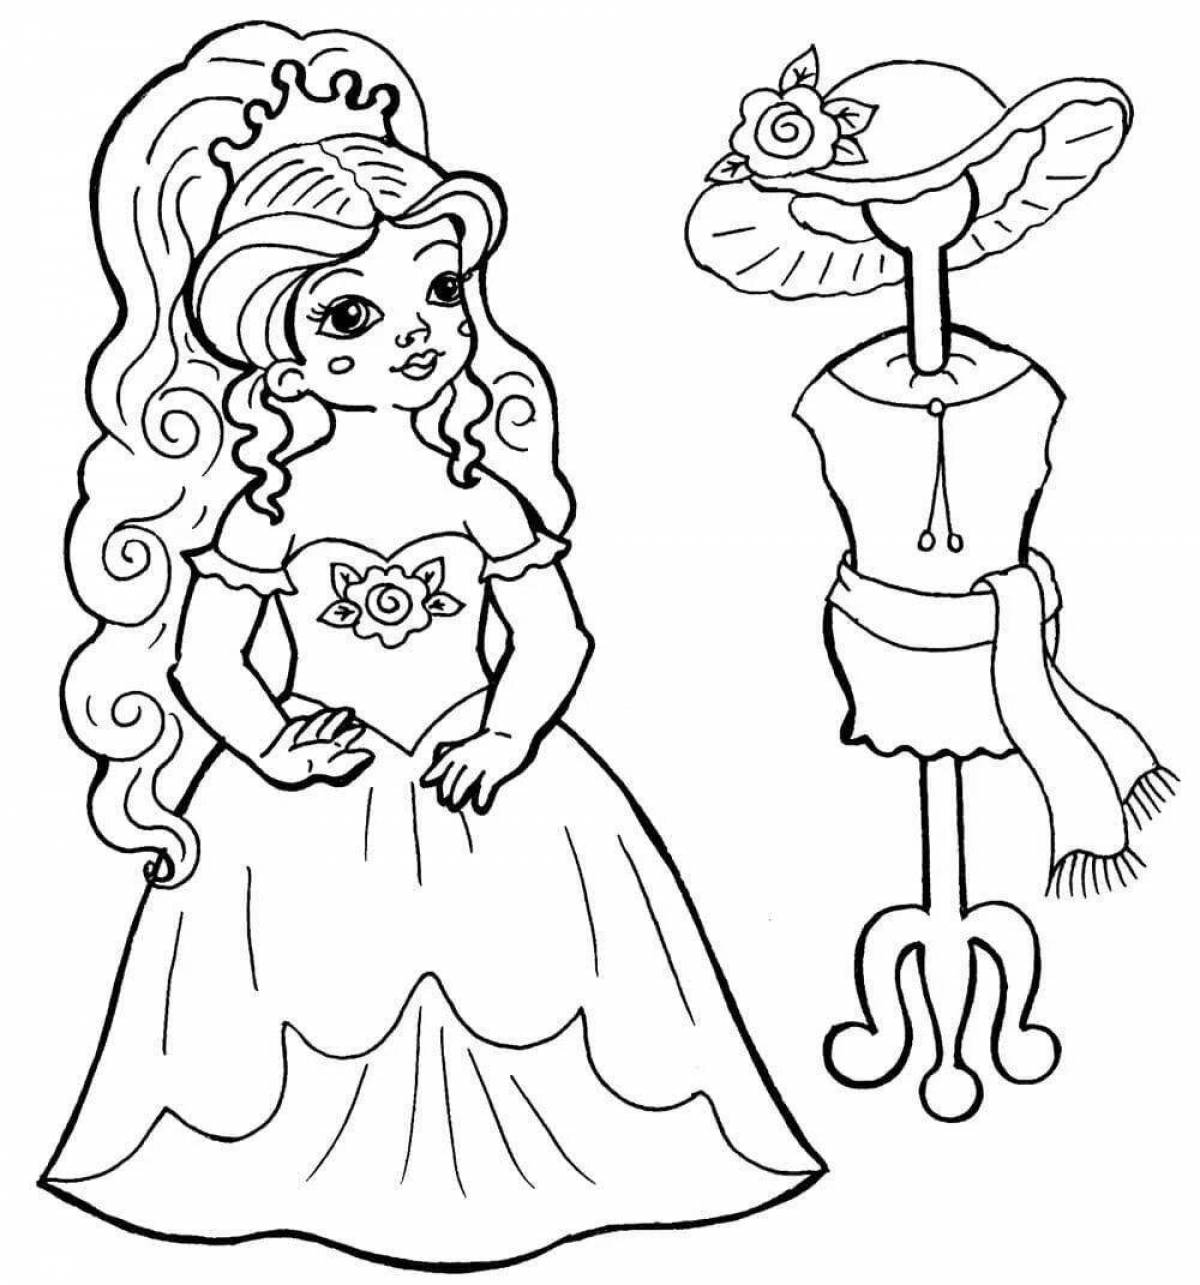 Exquisite coloring book for 5 year old girls, princess